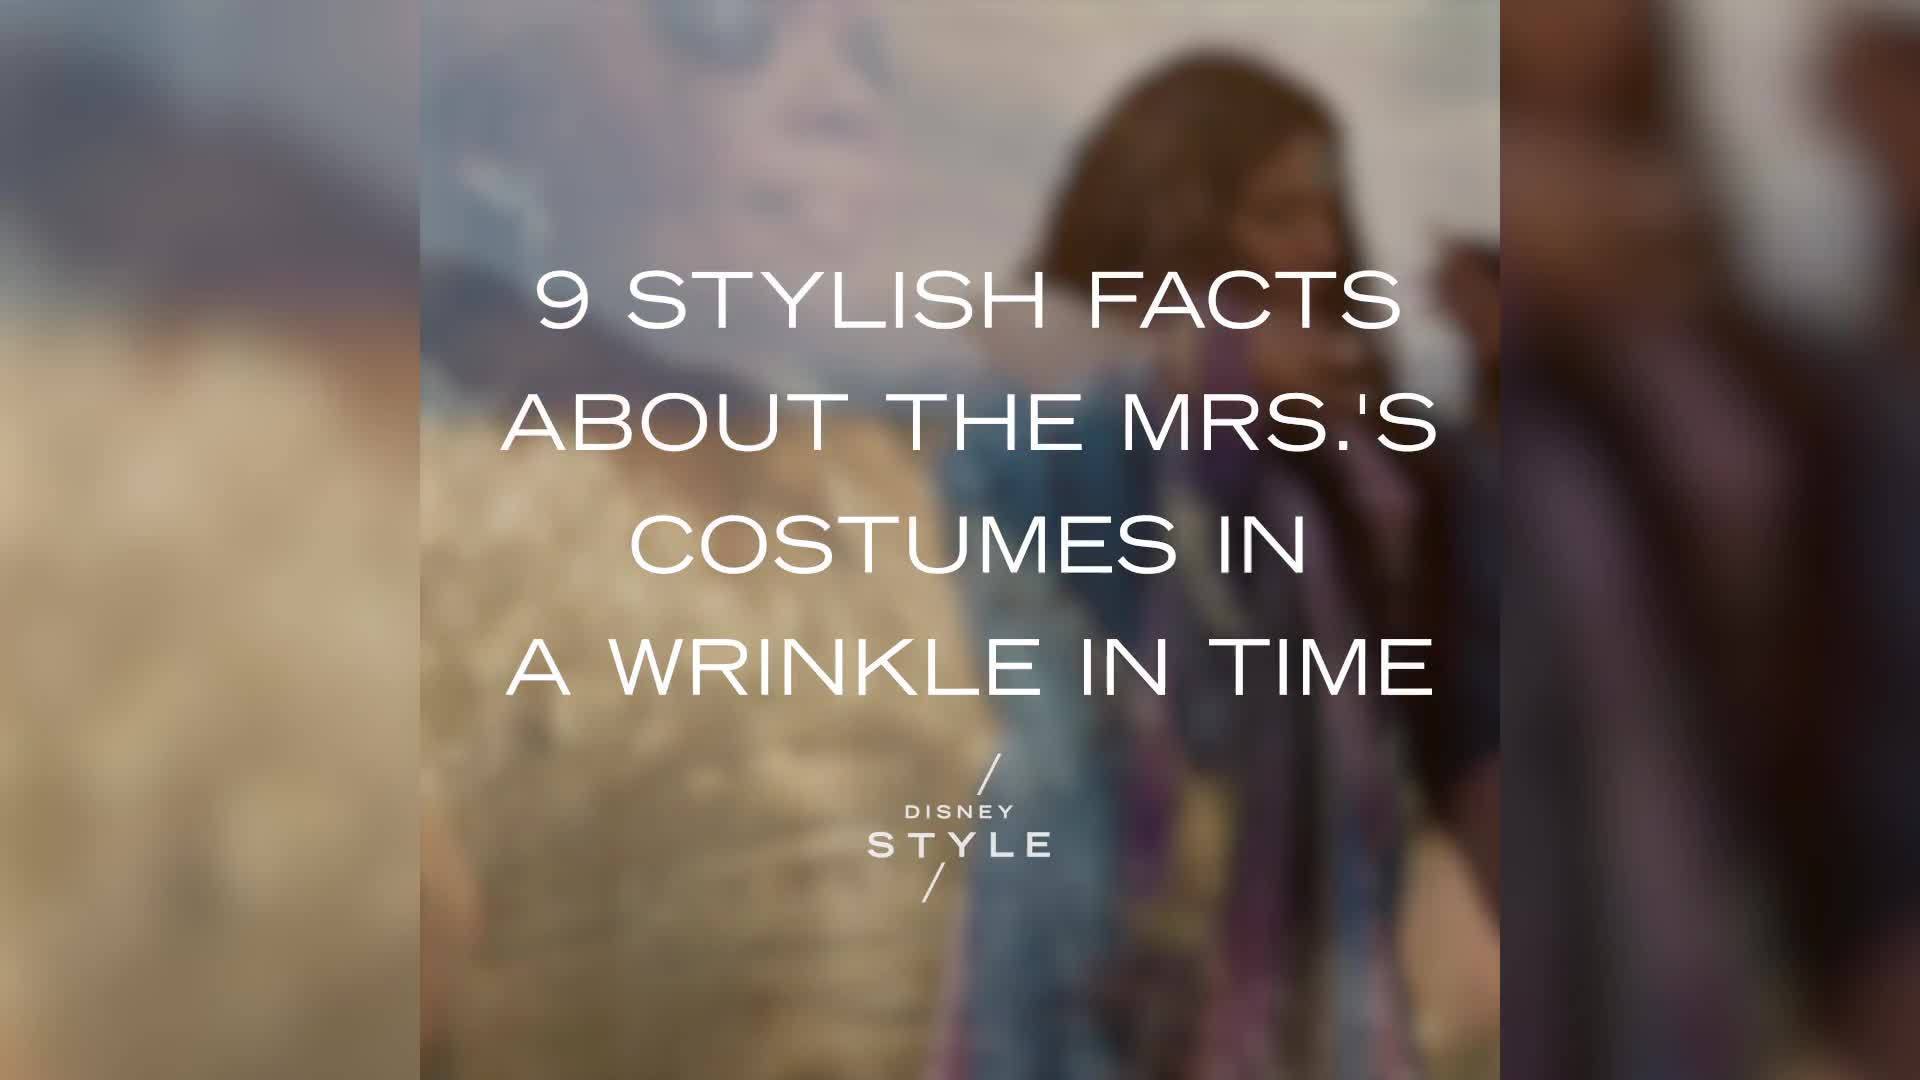 9 Stylish Facts About the Mrs.'s Costumes in A Wrinkle in Time | Fashion by Disney Style